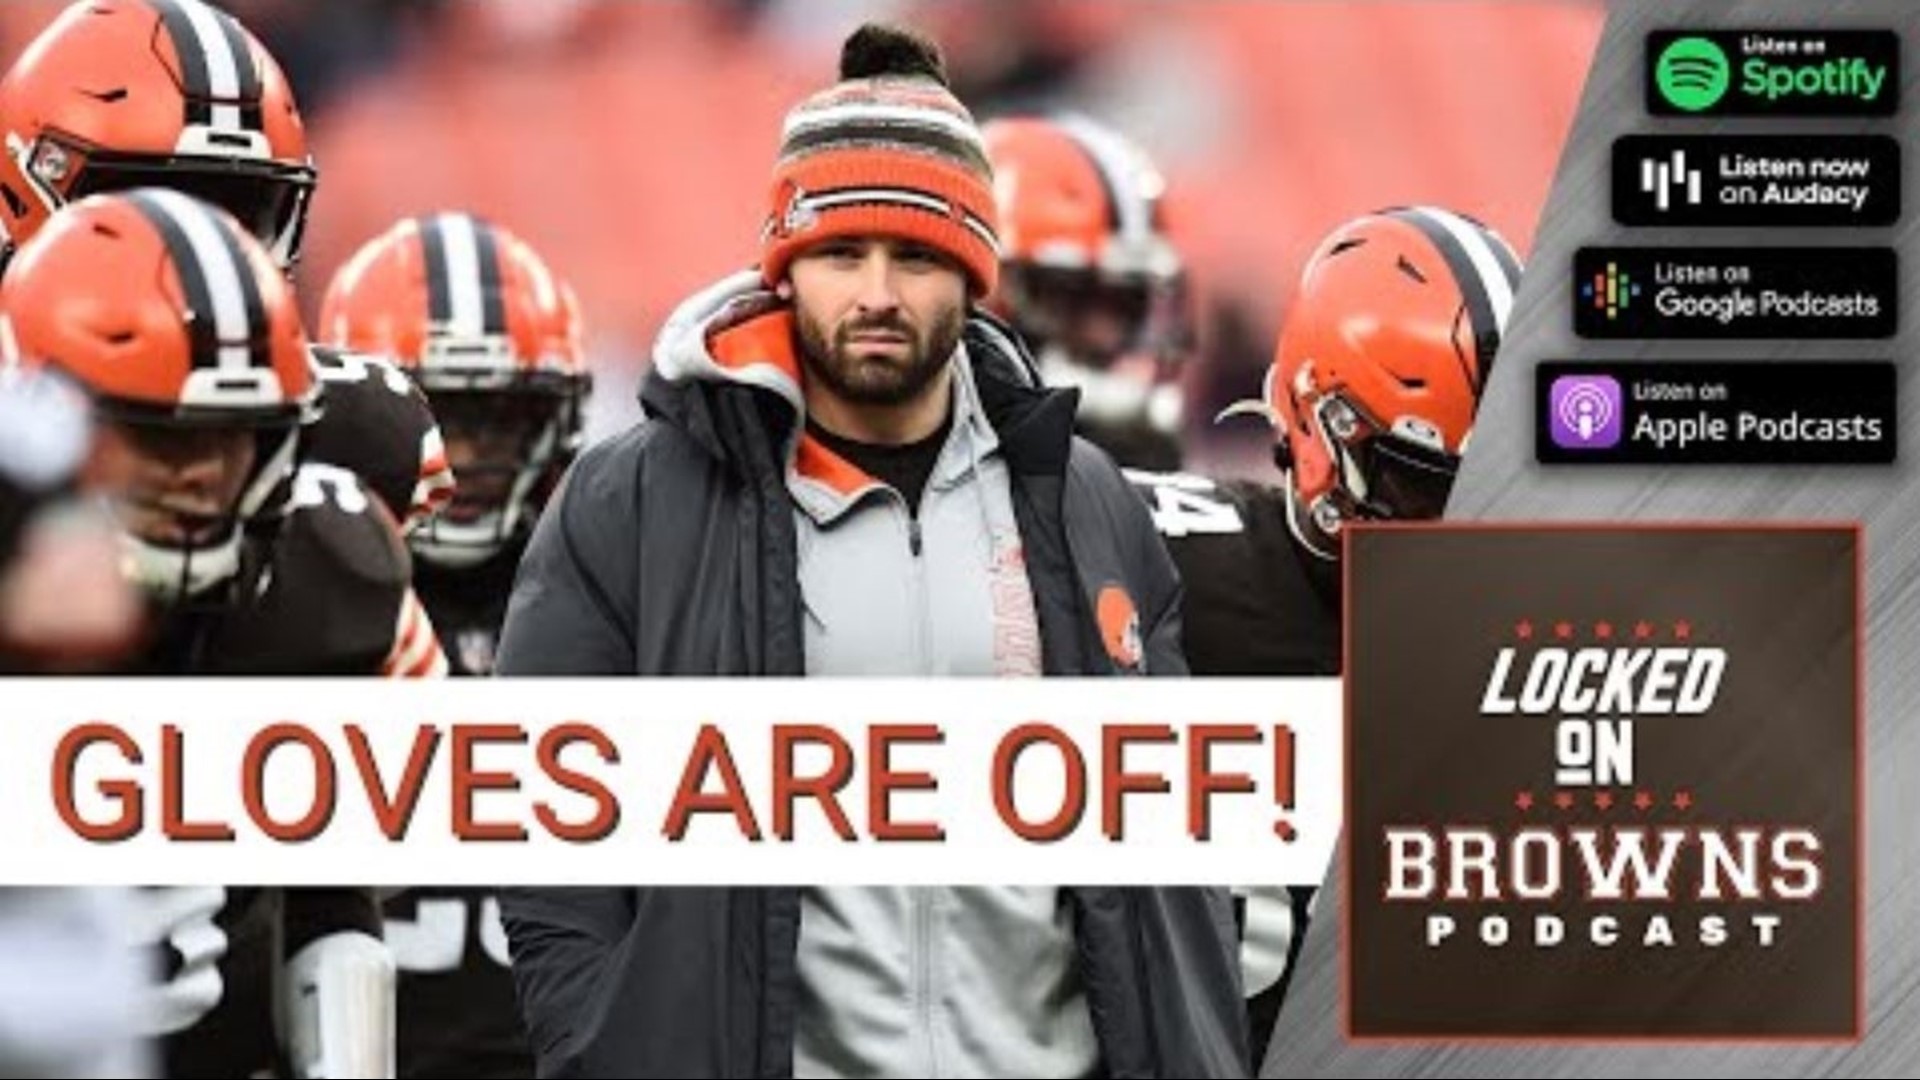 Baker Mayfield and Kevin Stefanski's tumultuous relationship is starting to come to light after the Browns traded the former number 1 pick to the Carolina Panthers.